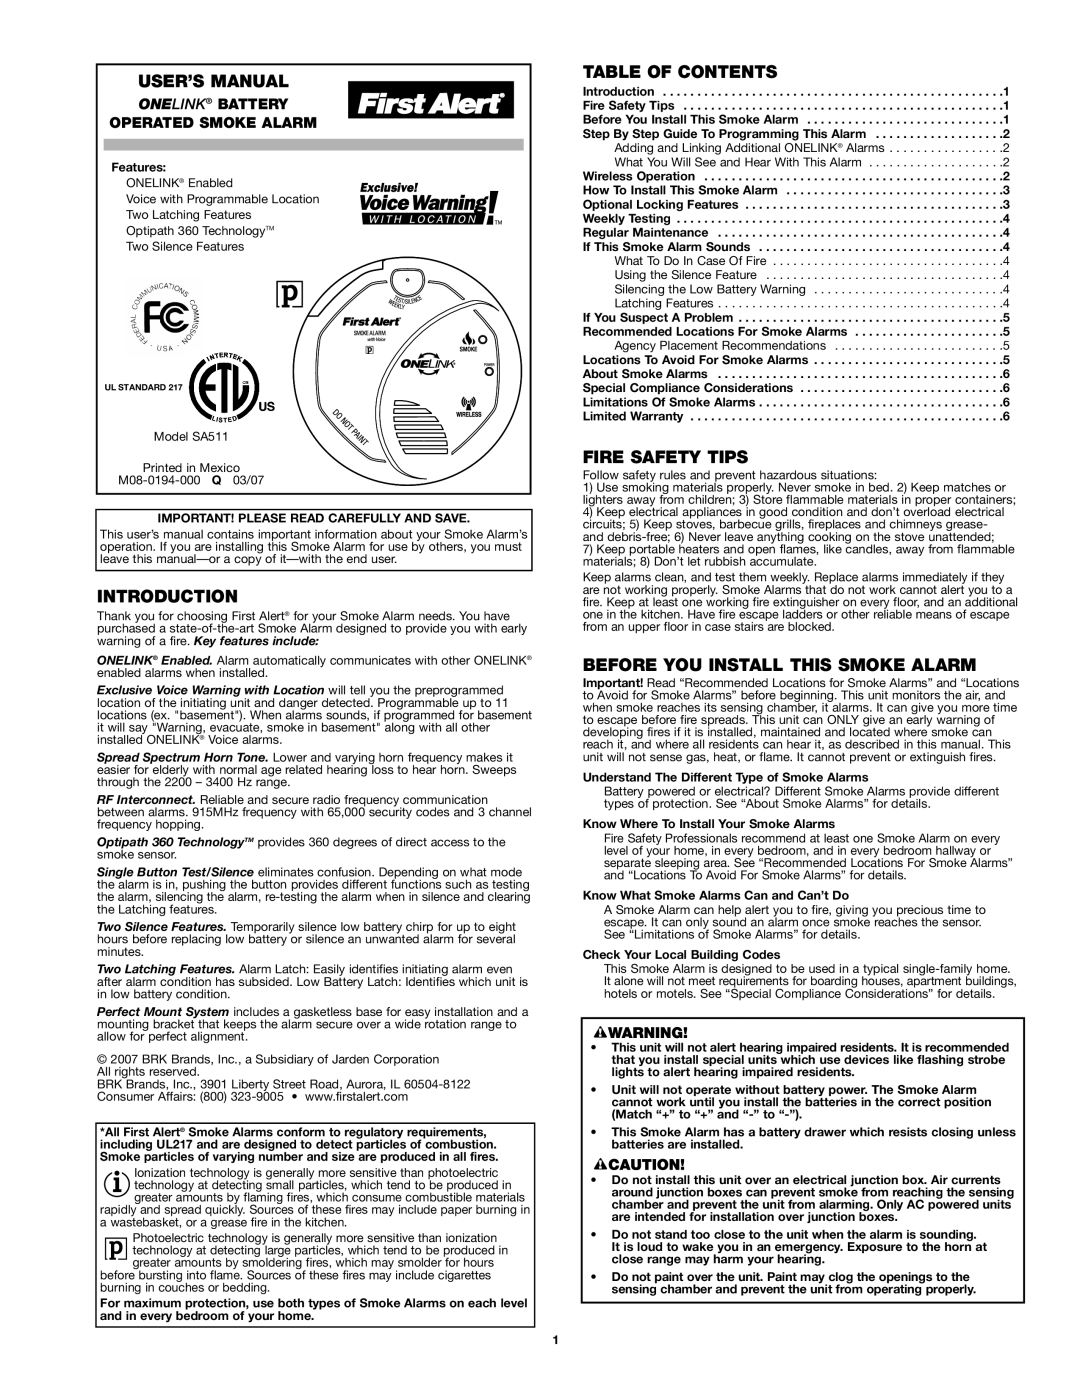 First Alert SA511CN2-3ST user manual User’S Manual, Introduction, Table Of Contents, Fire Safety Tips, Onelink Battery 